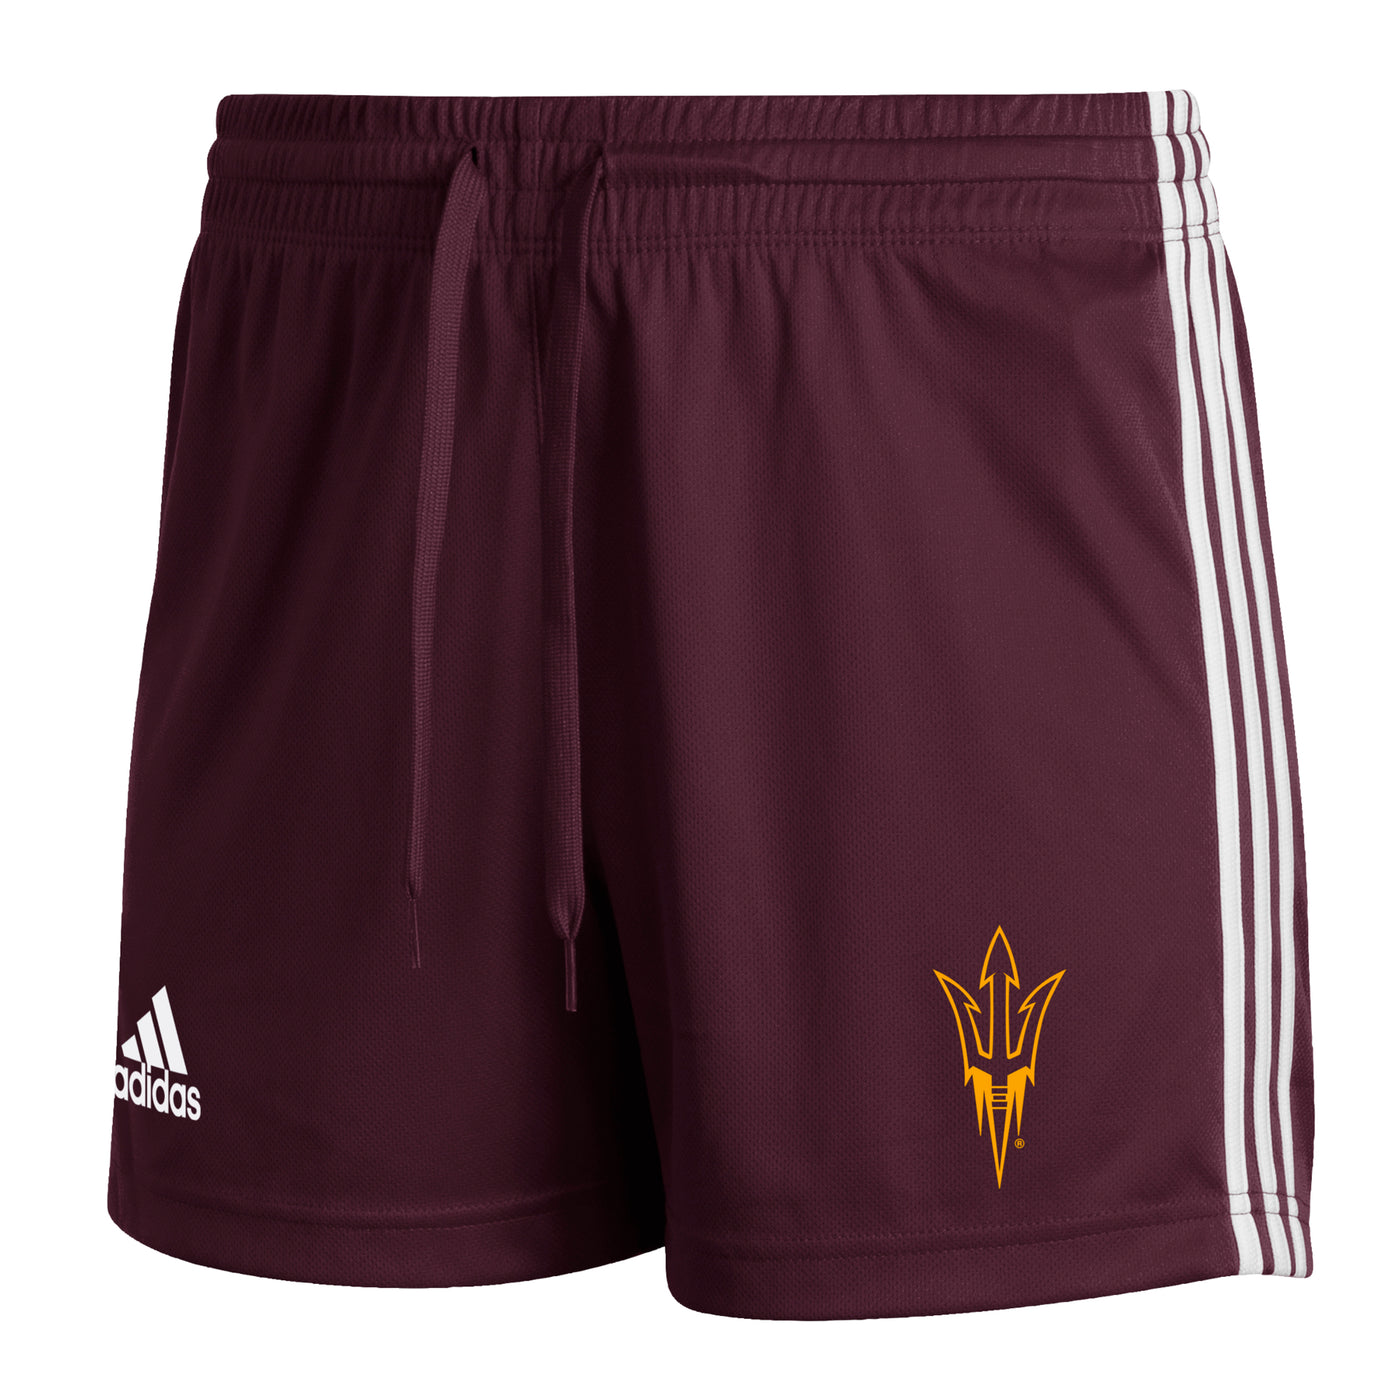 ASU maroon women's shorts with 3 white stripes down the sides and a gold pitchfork outline on the leg and a maroon drawstring